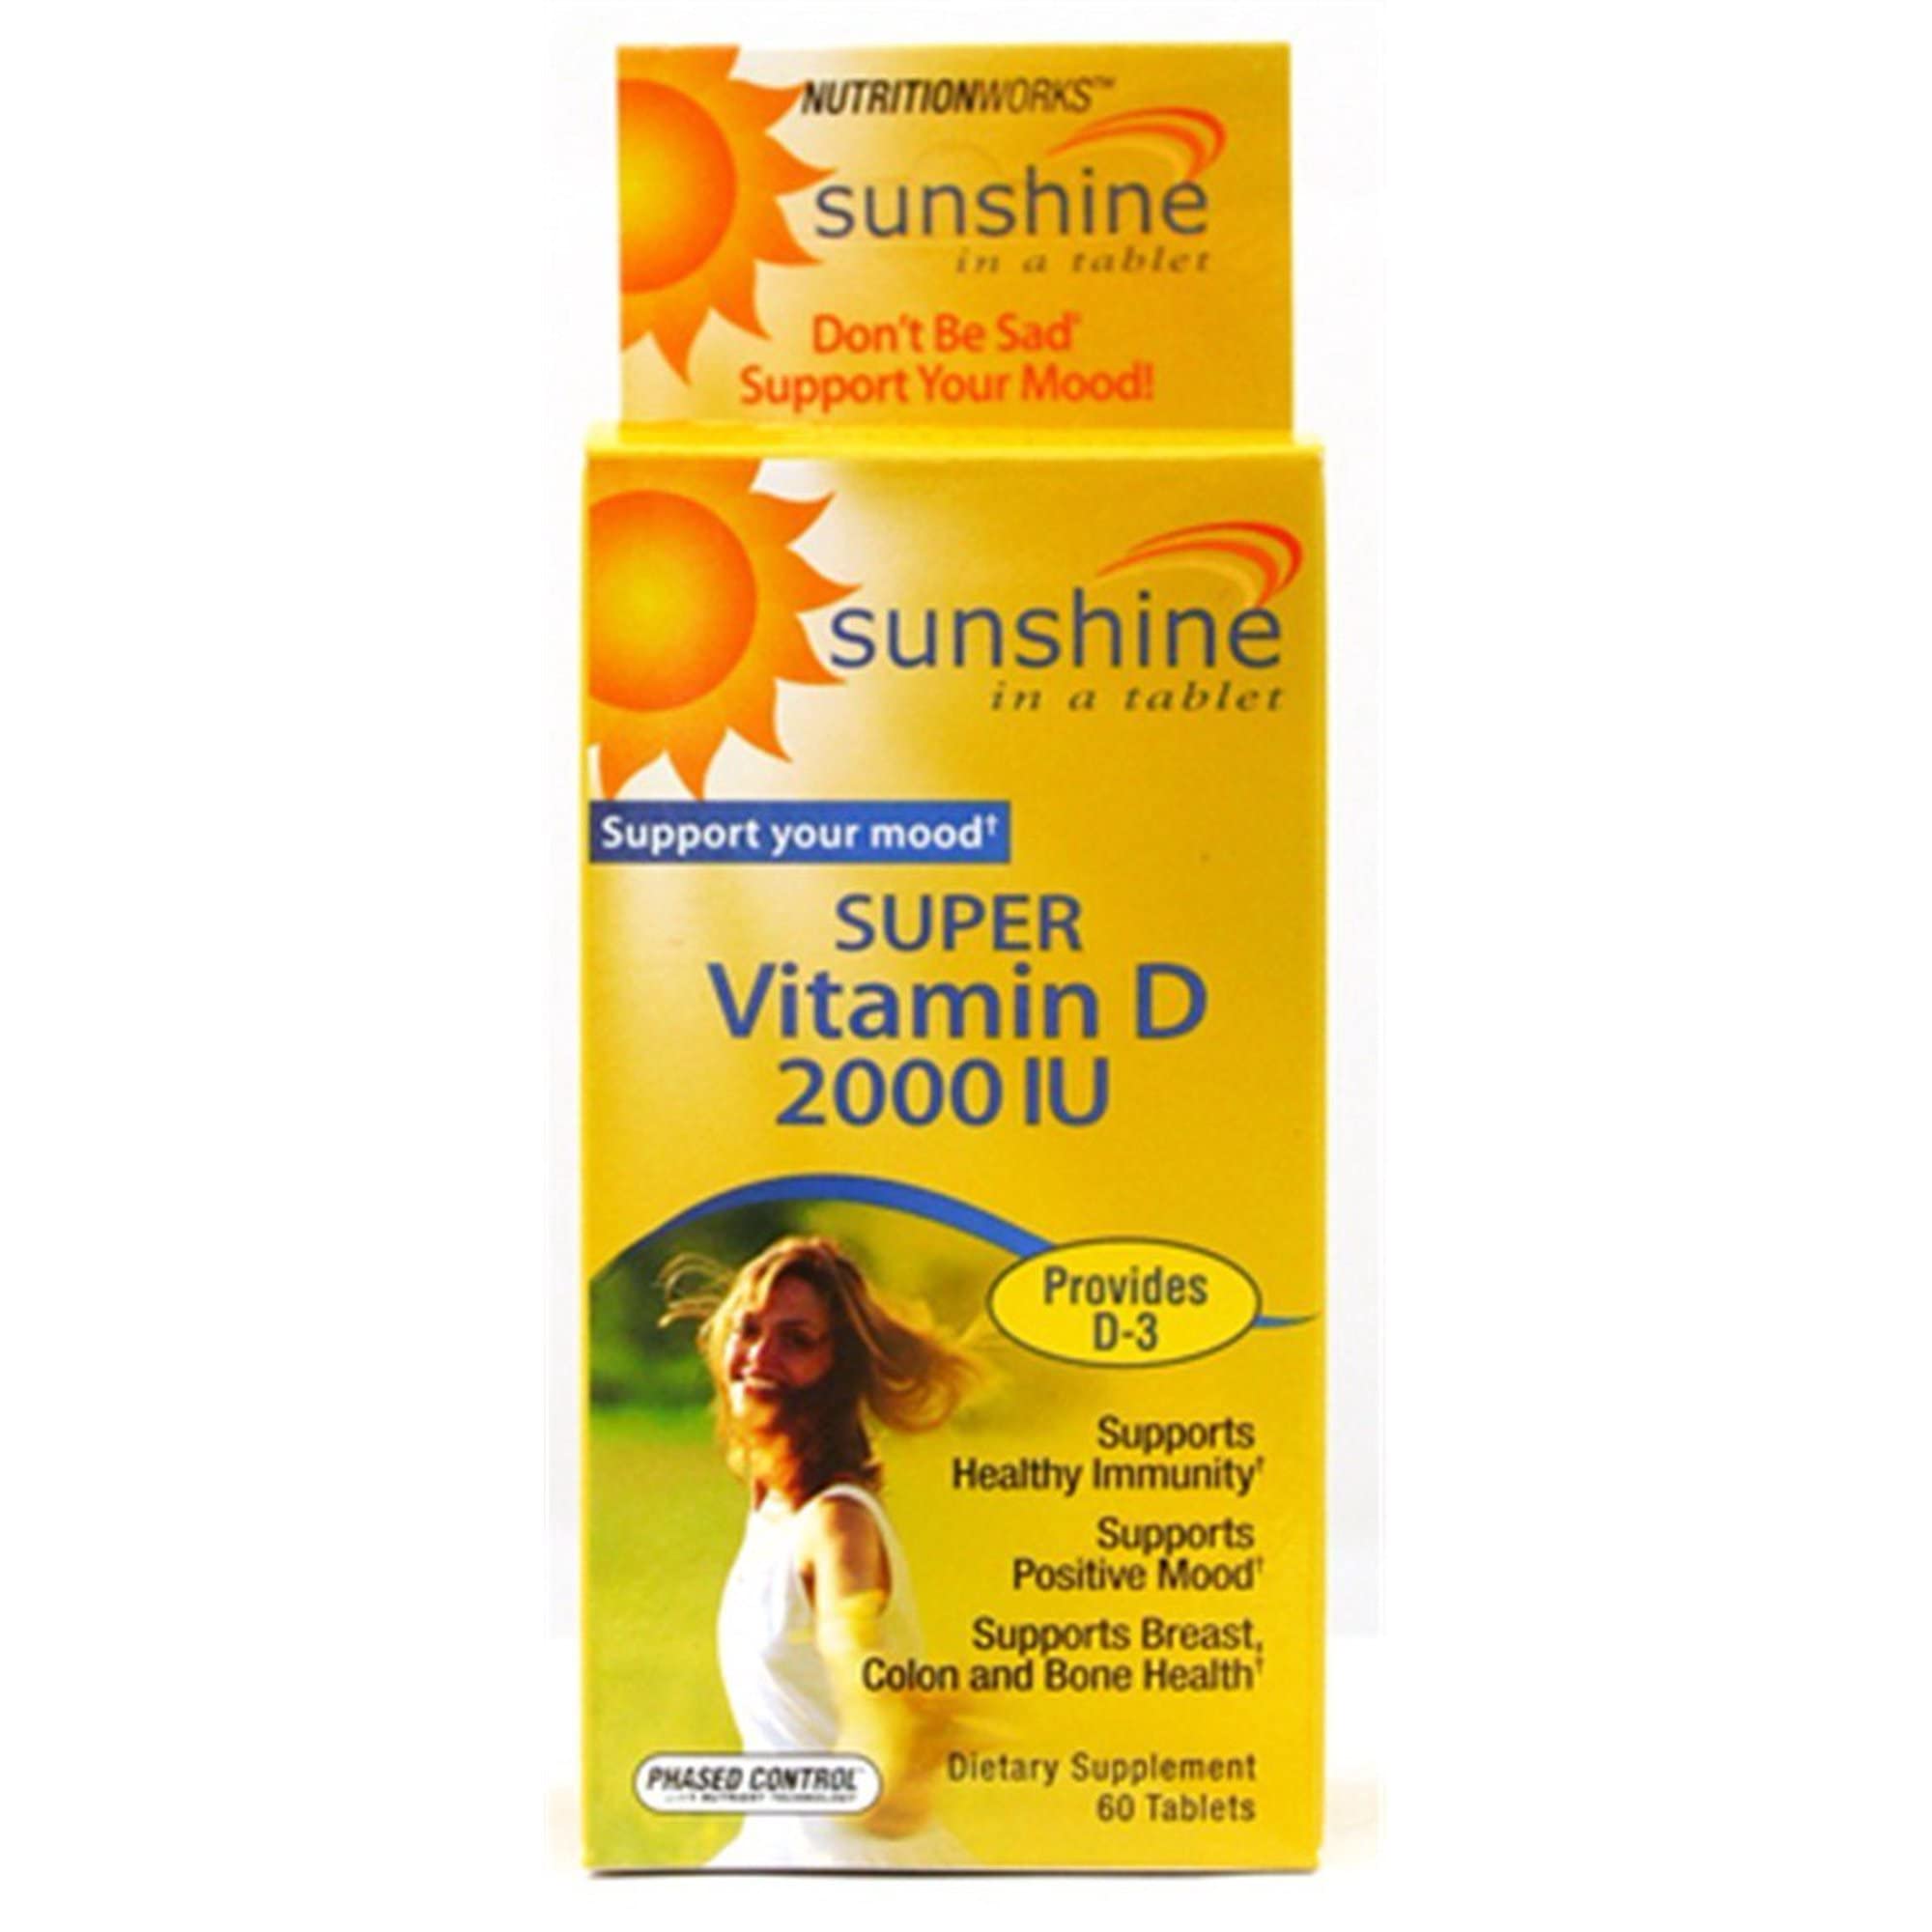 Windmill sunshine super vitamin D 2000 IU phased control dietary supplement tablets - 60 ea